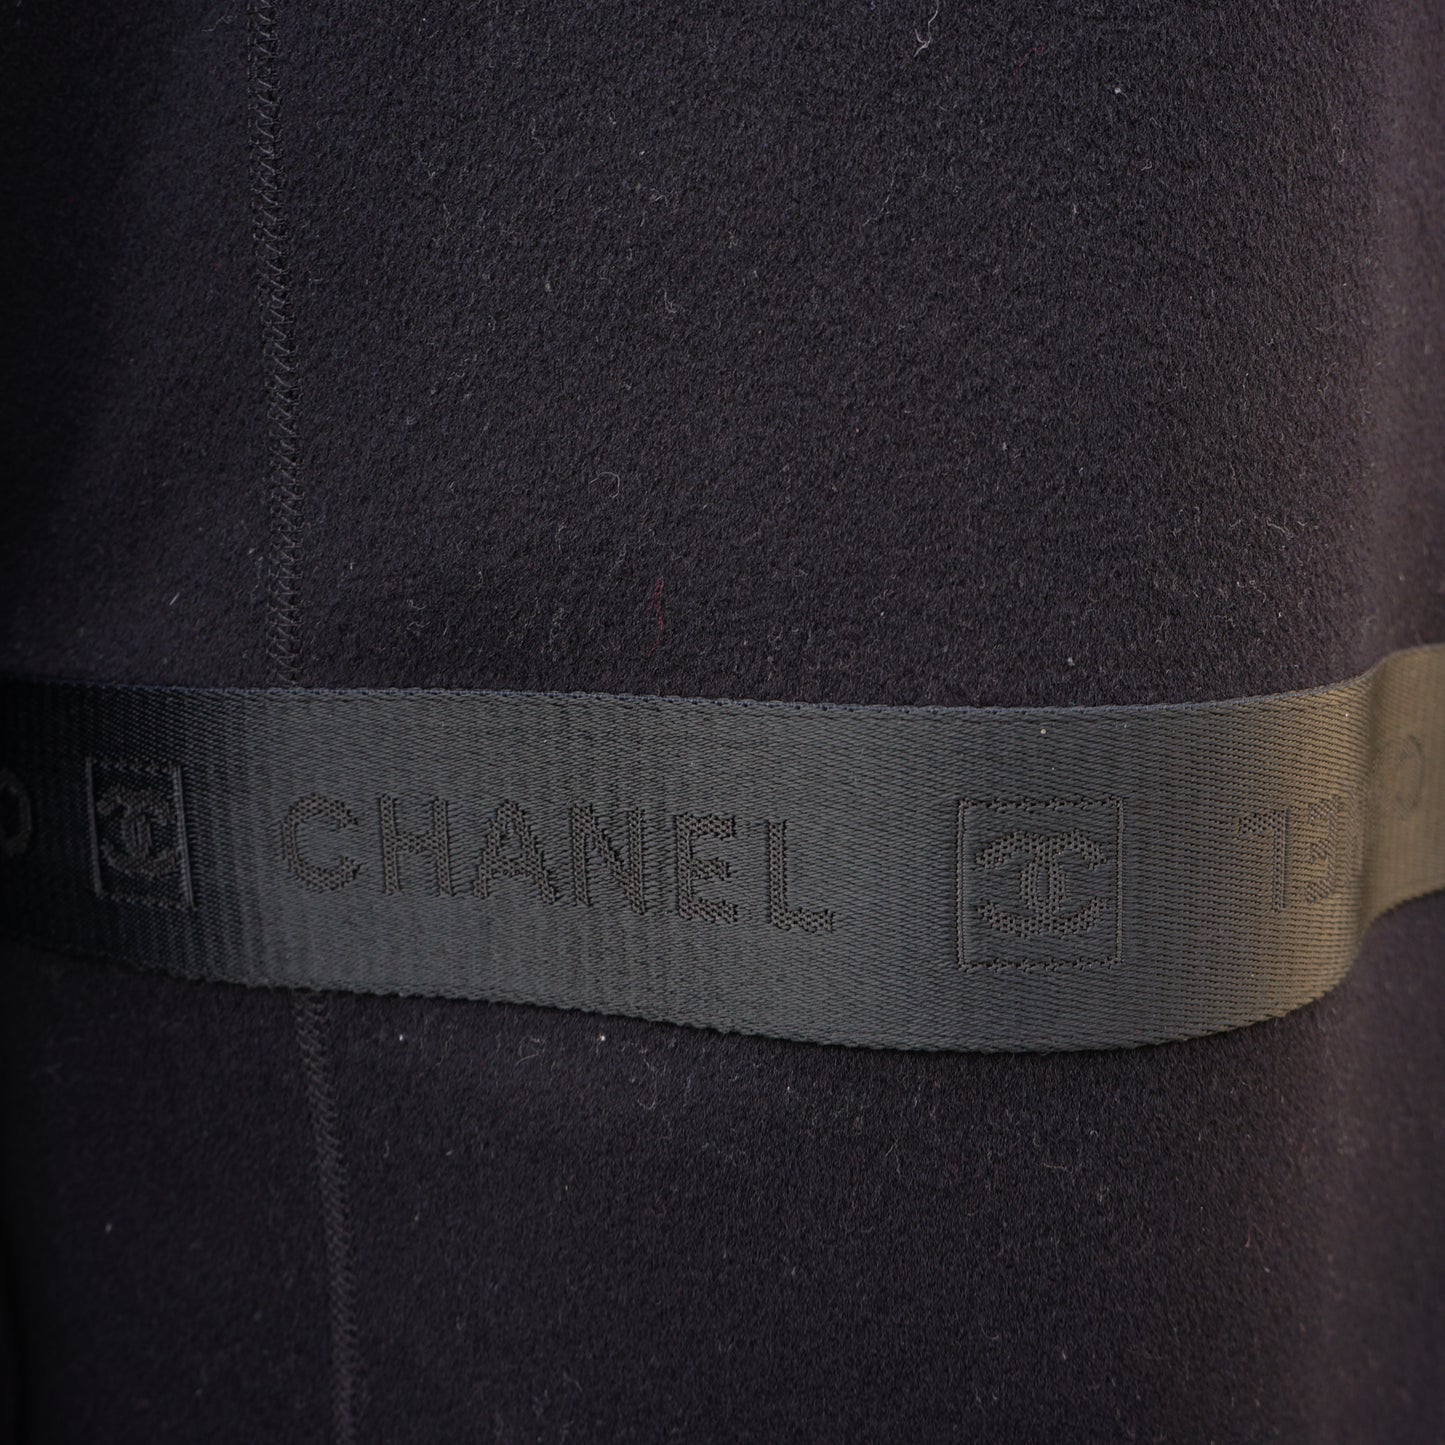 CHANEL WOOL COAT WITH QUILTED LINING COAT - leefluxury.com